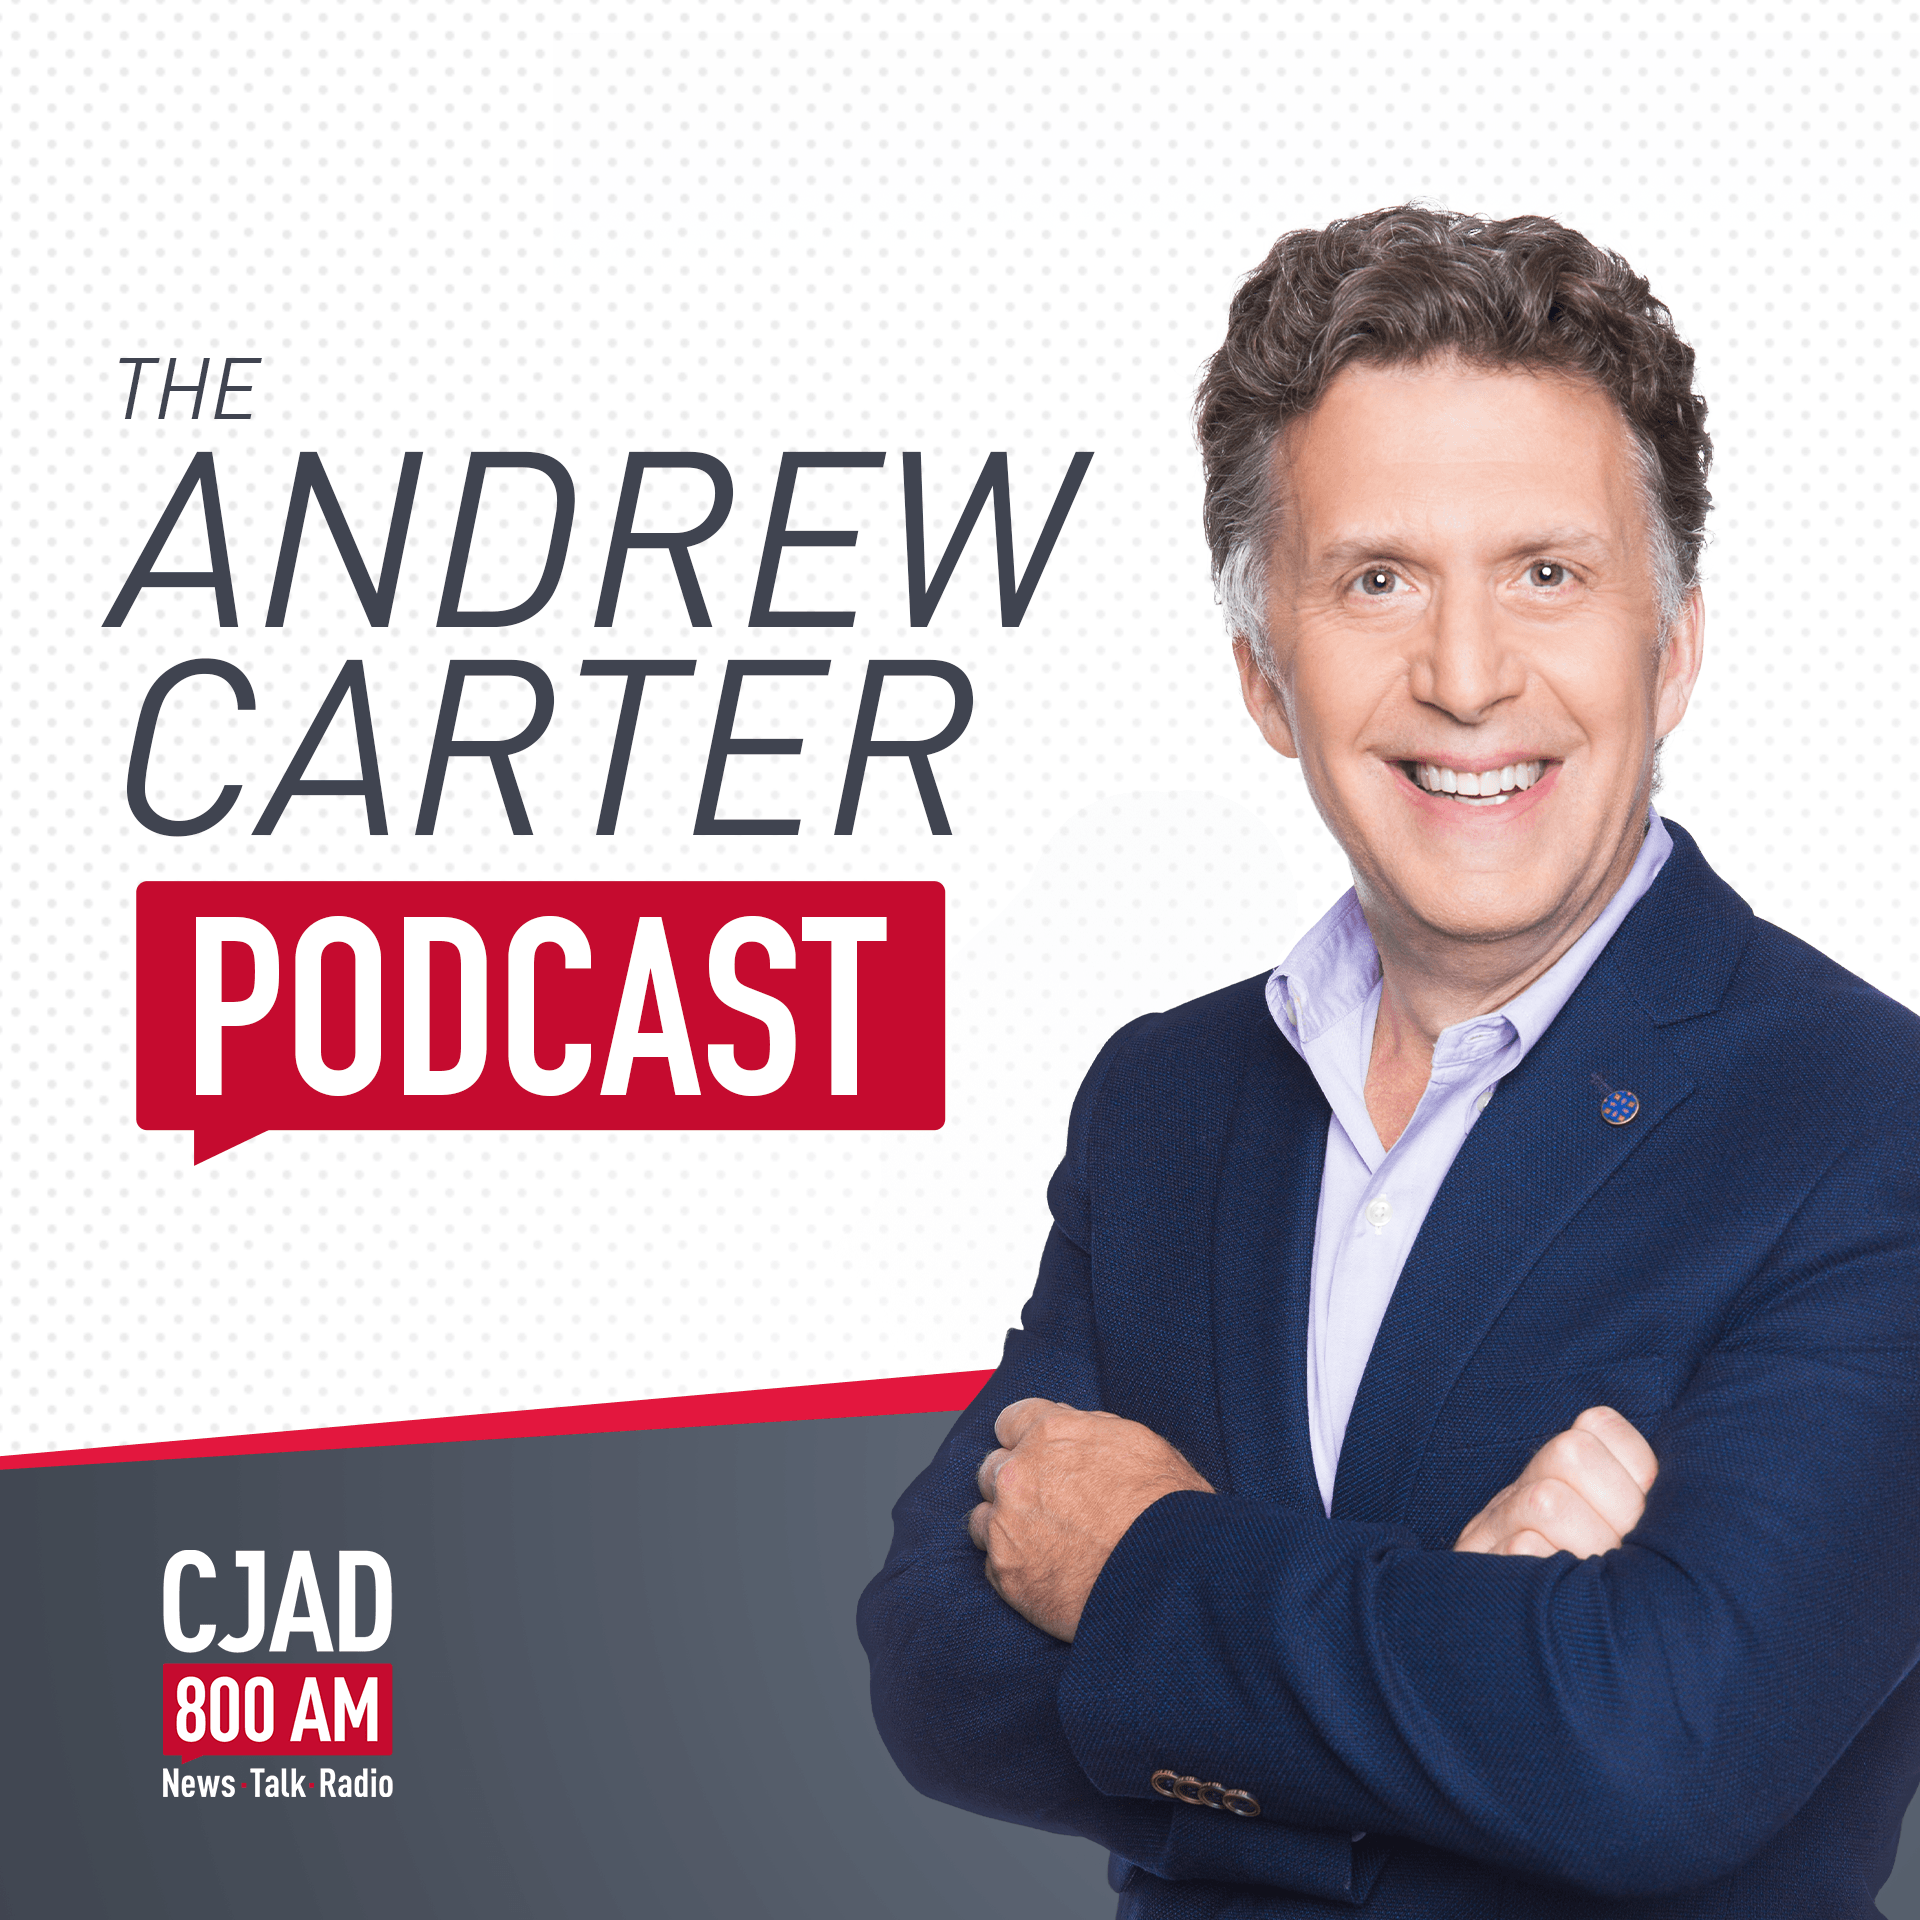 The Andrew Carter Podcast